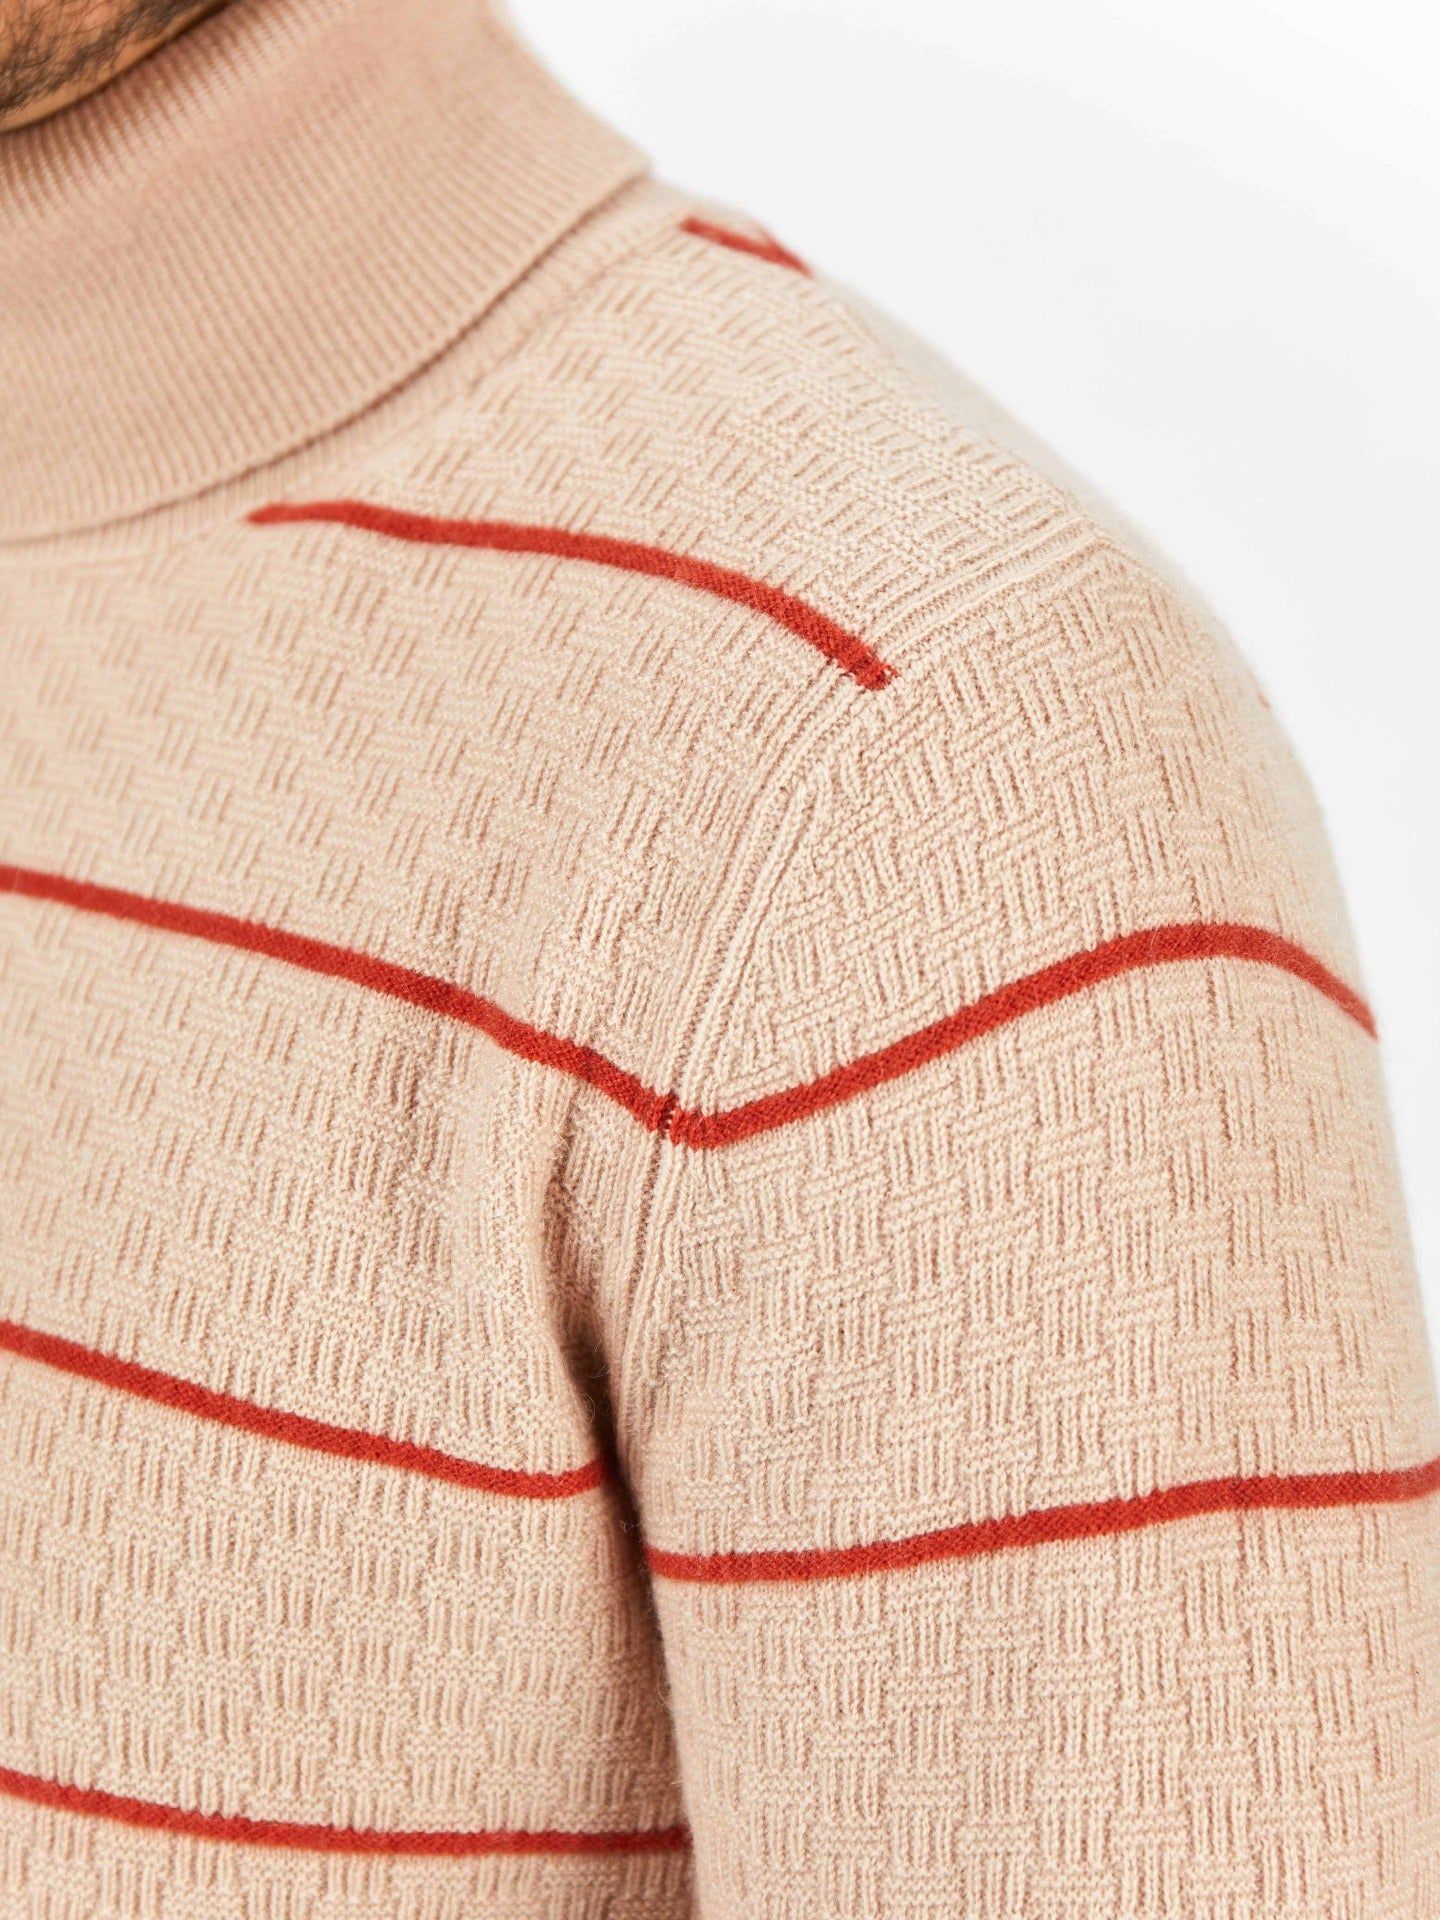 Men's Cashmere Textured High Neck Sweater With Stripes Toasted Almond - Gobi Cashmere 